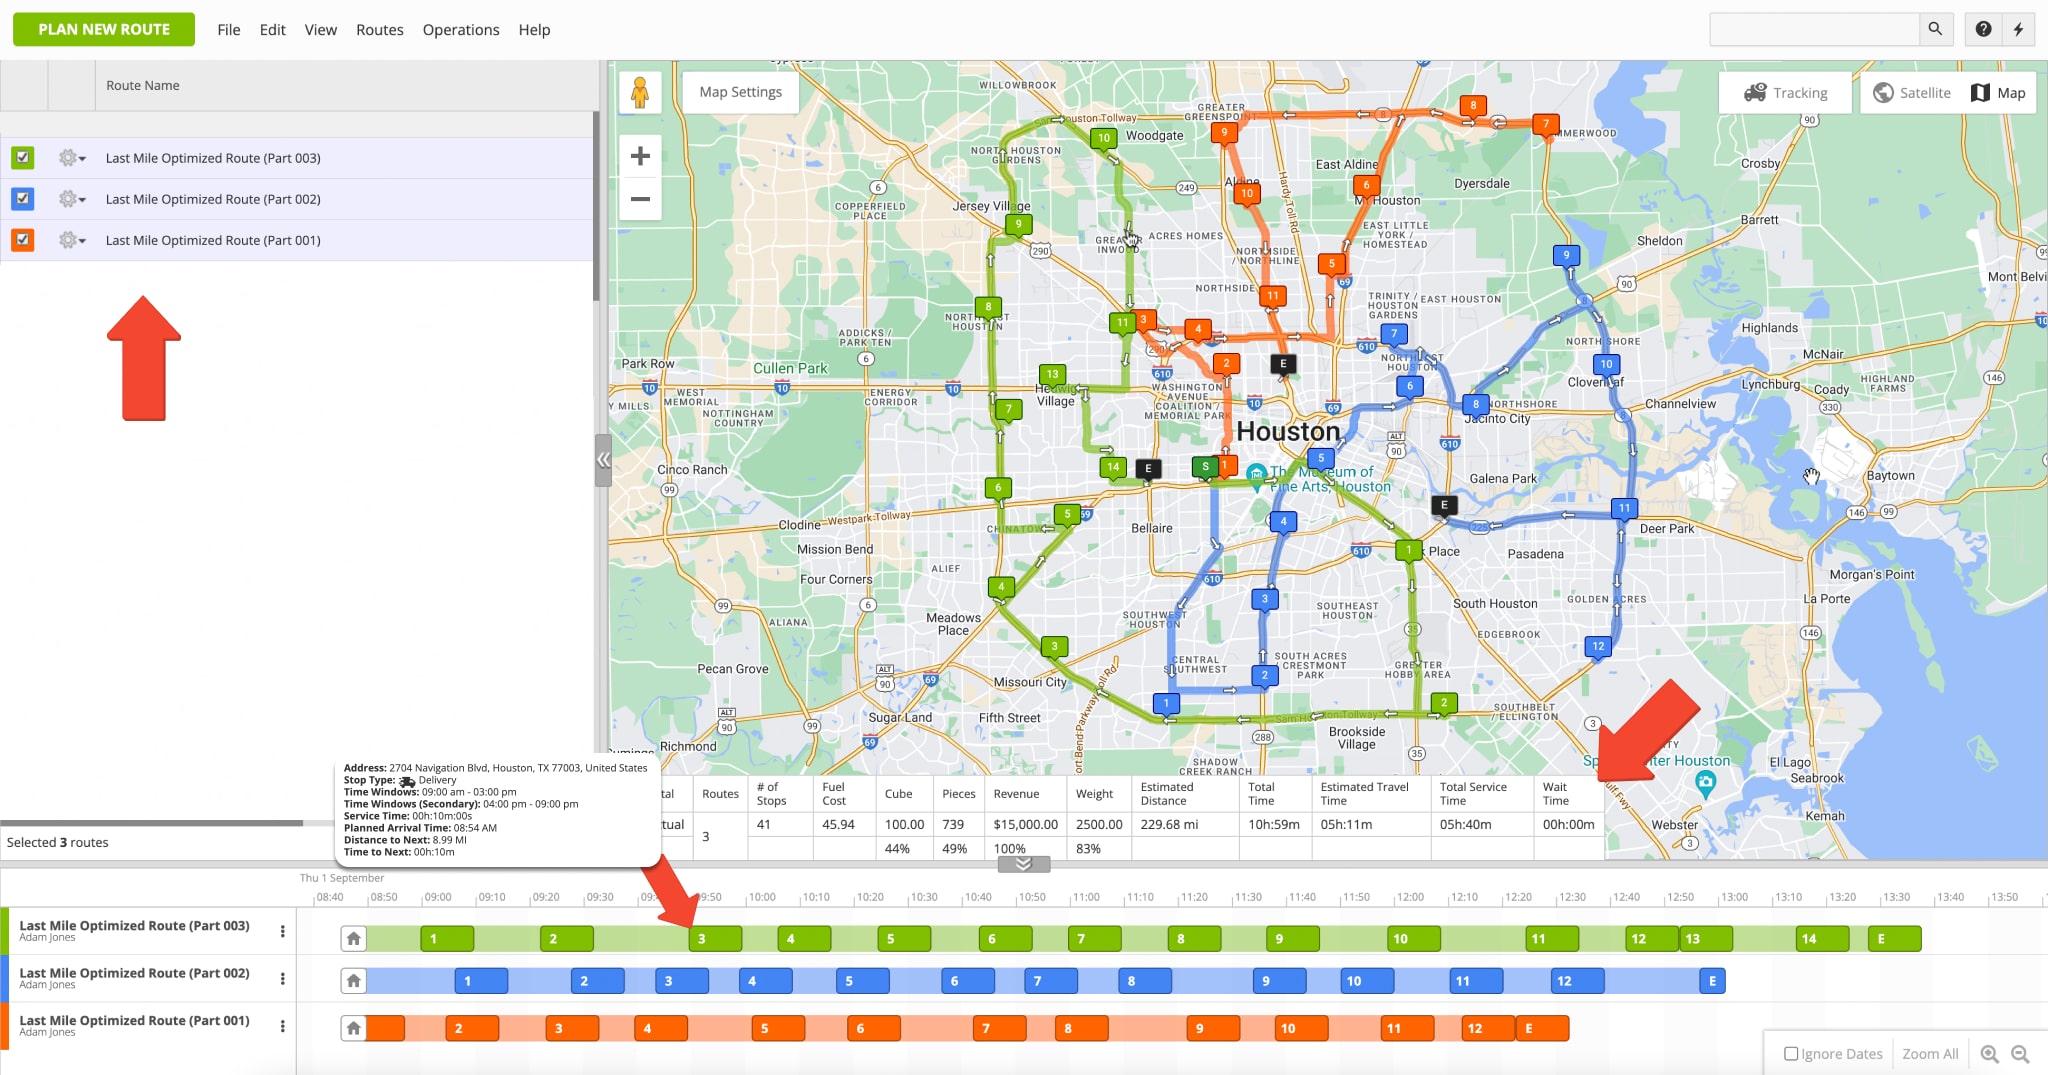 Optimized last mile routes with Customer Time Windows and minimized wait time between route stops.